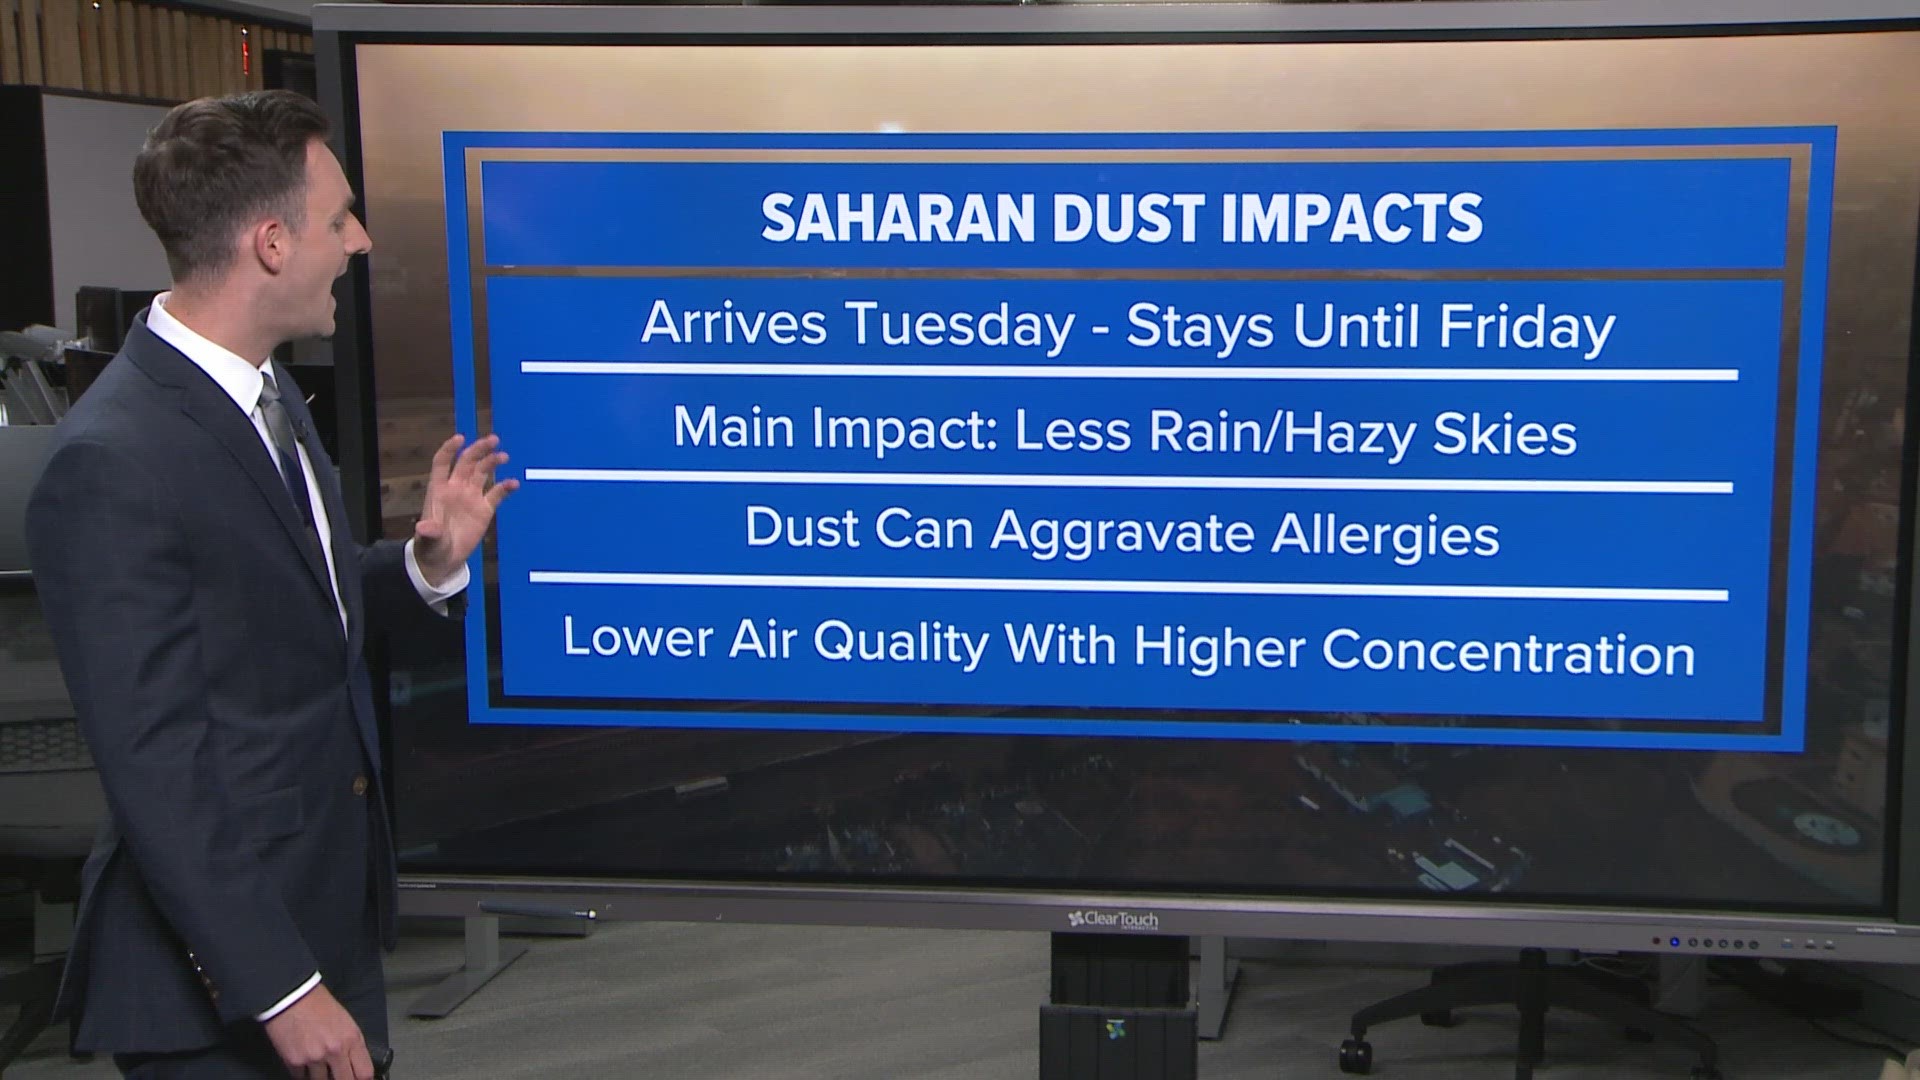 The dust is expected to arrive as early as Tuesday, July 25 and stick around through Friday, July 28.